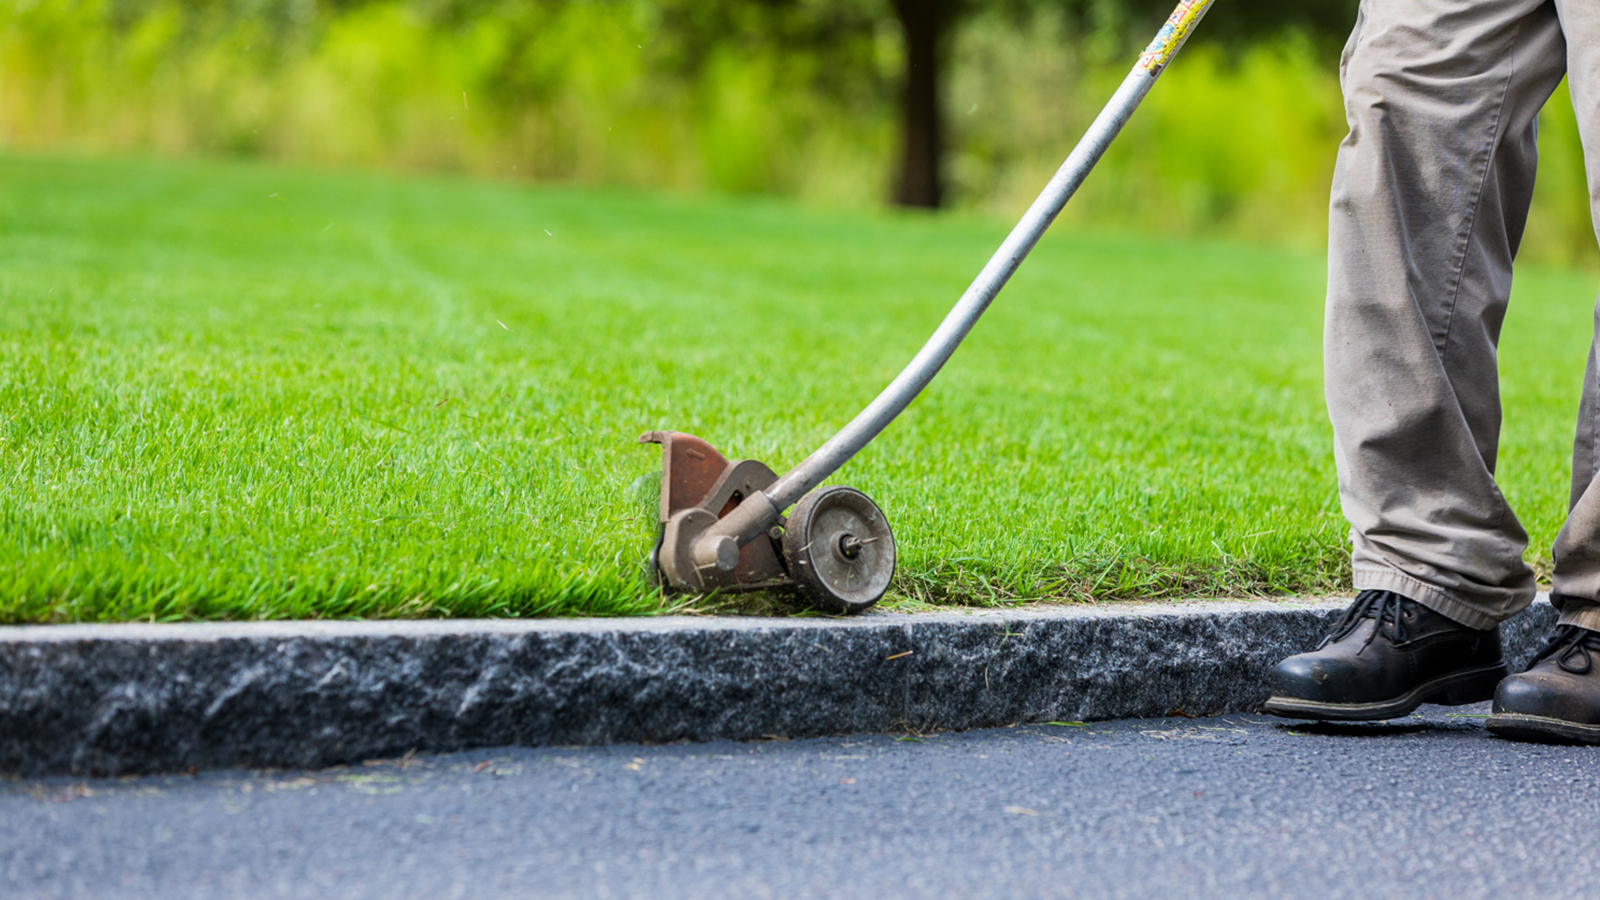 Lawn Maintenance Services in South Carolina 7